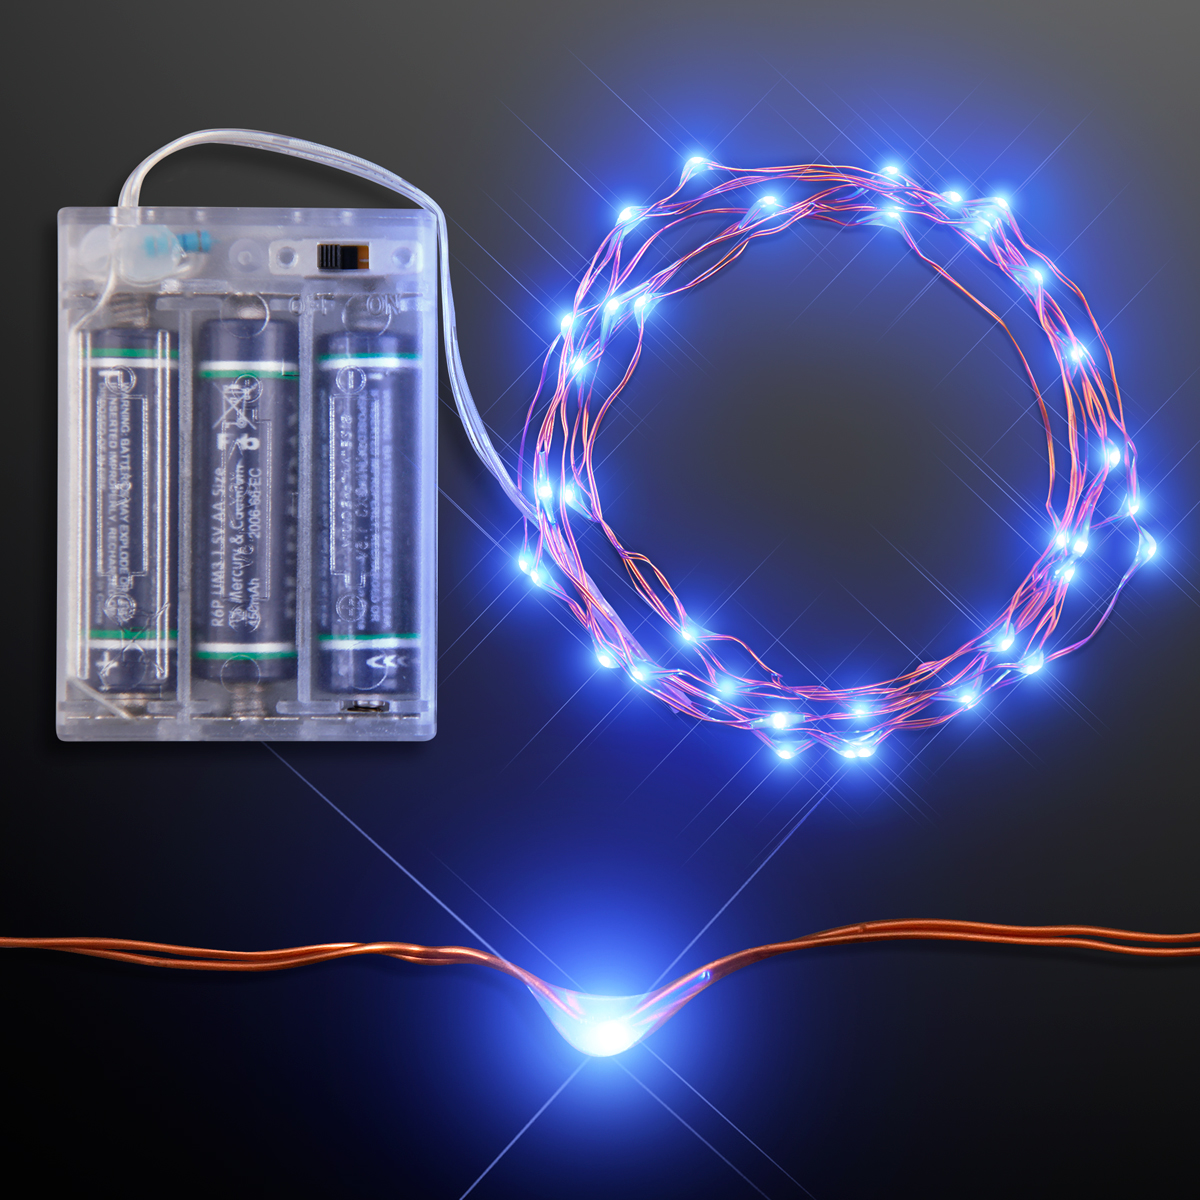 FlashingBlinkyLights 76" LED Battery Operated Craft String Lights - image 1 of 1